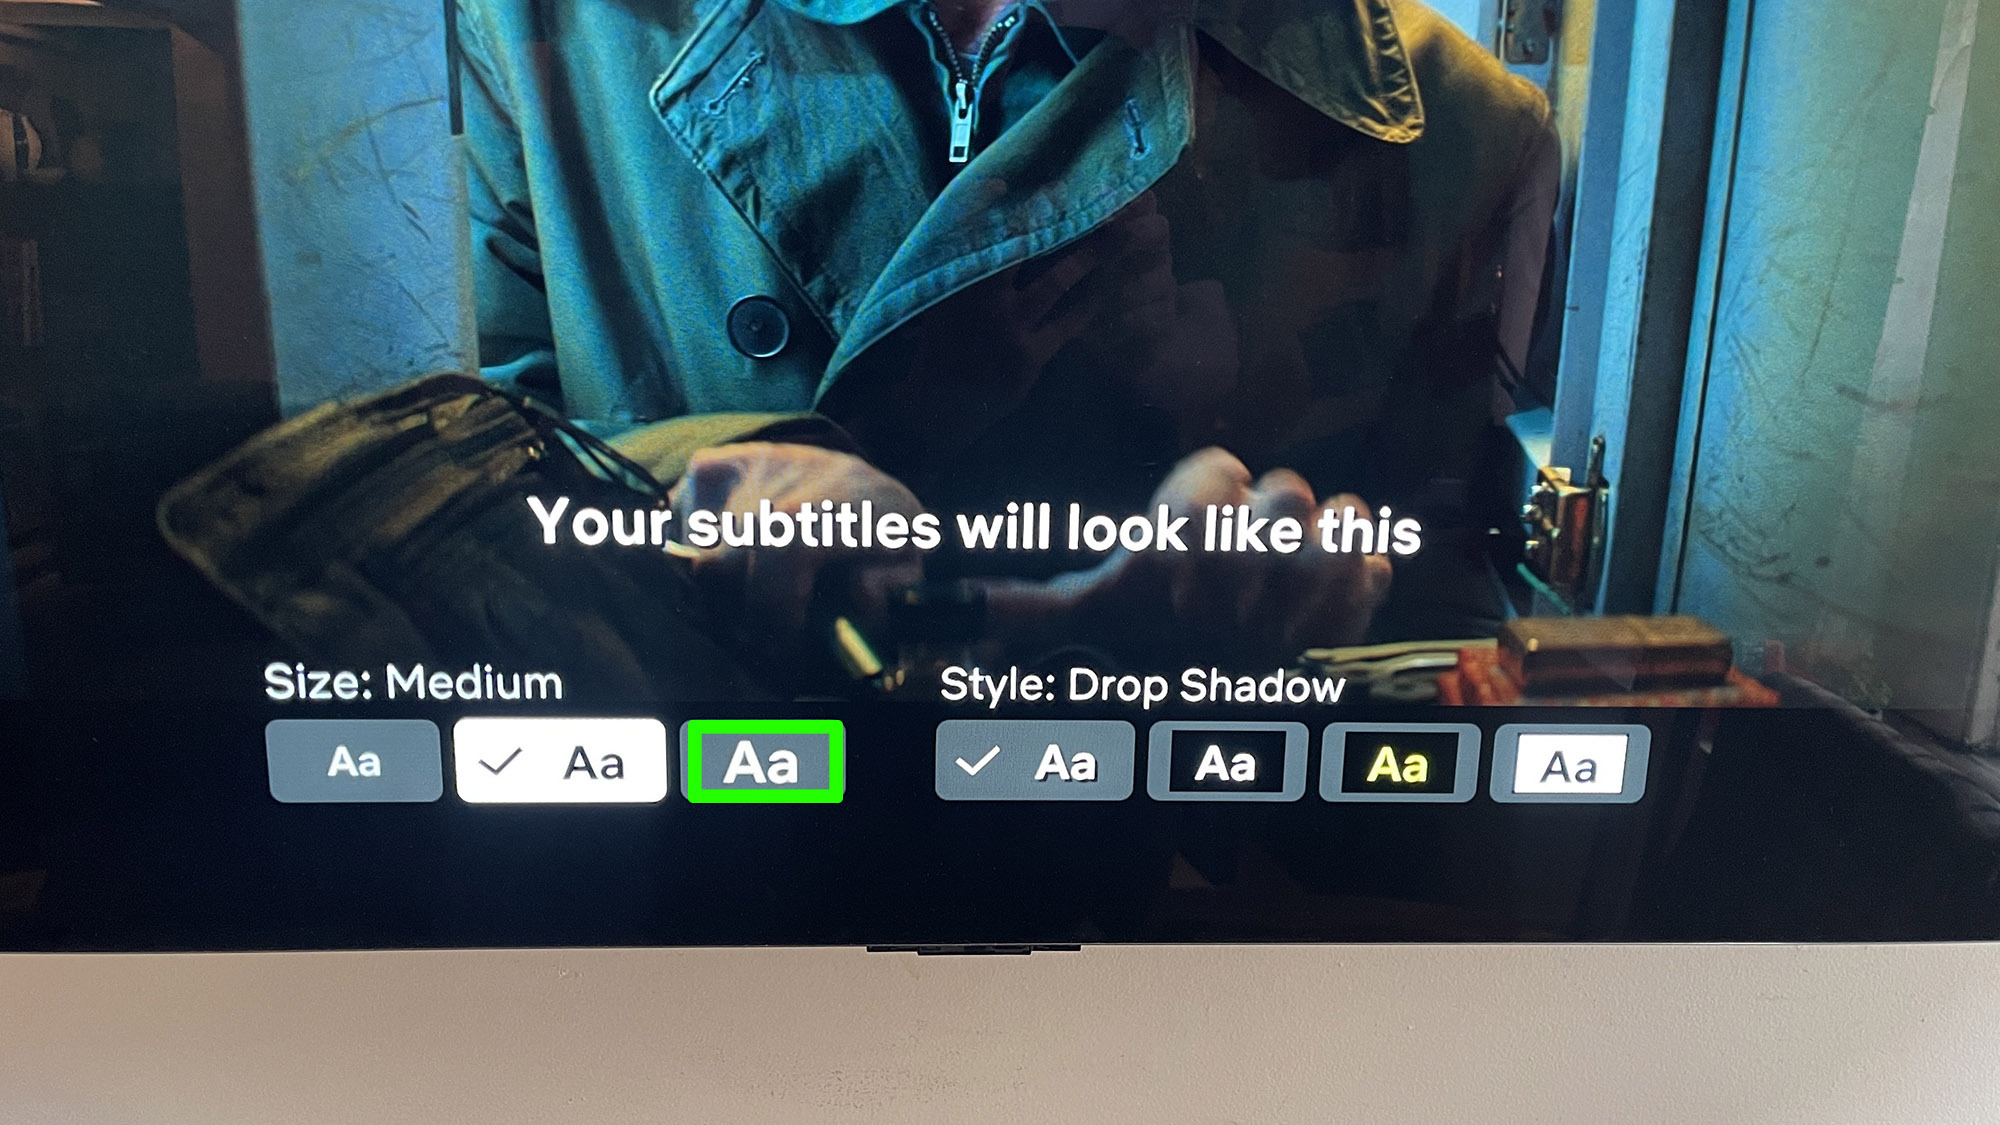 How to Change Netflix Subtitle Settings on Your TV